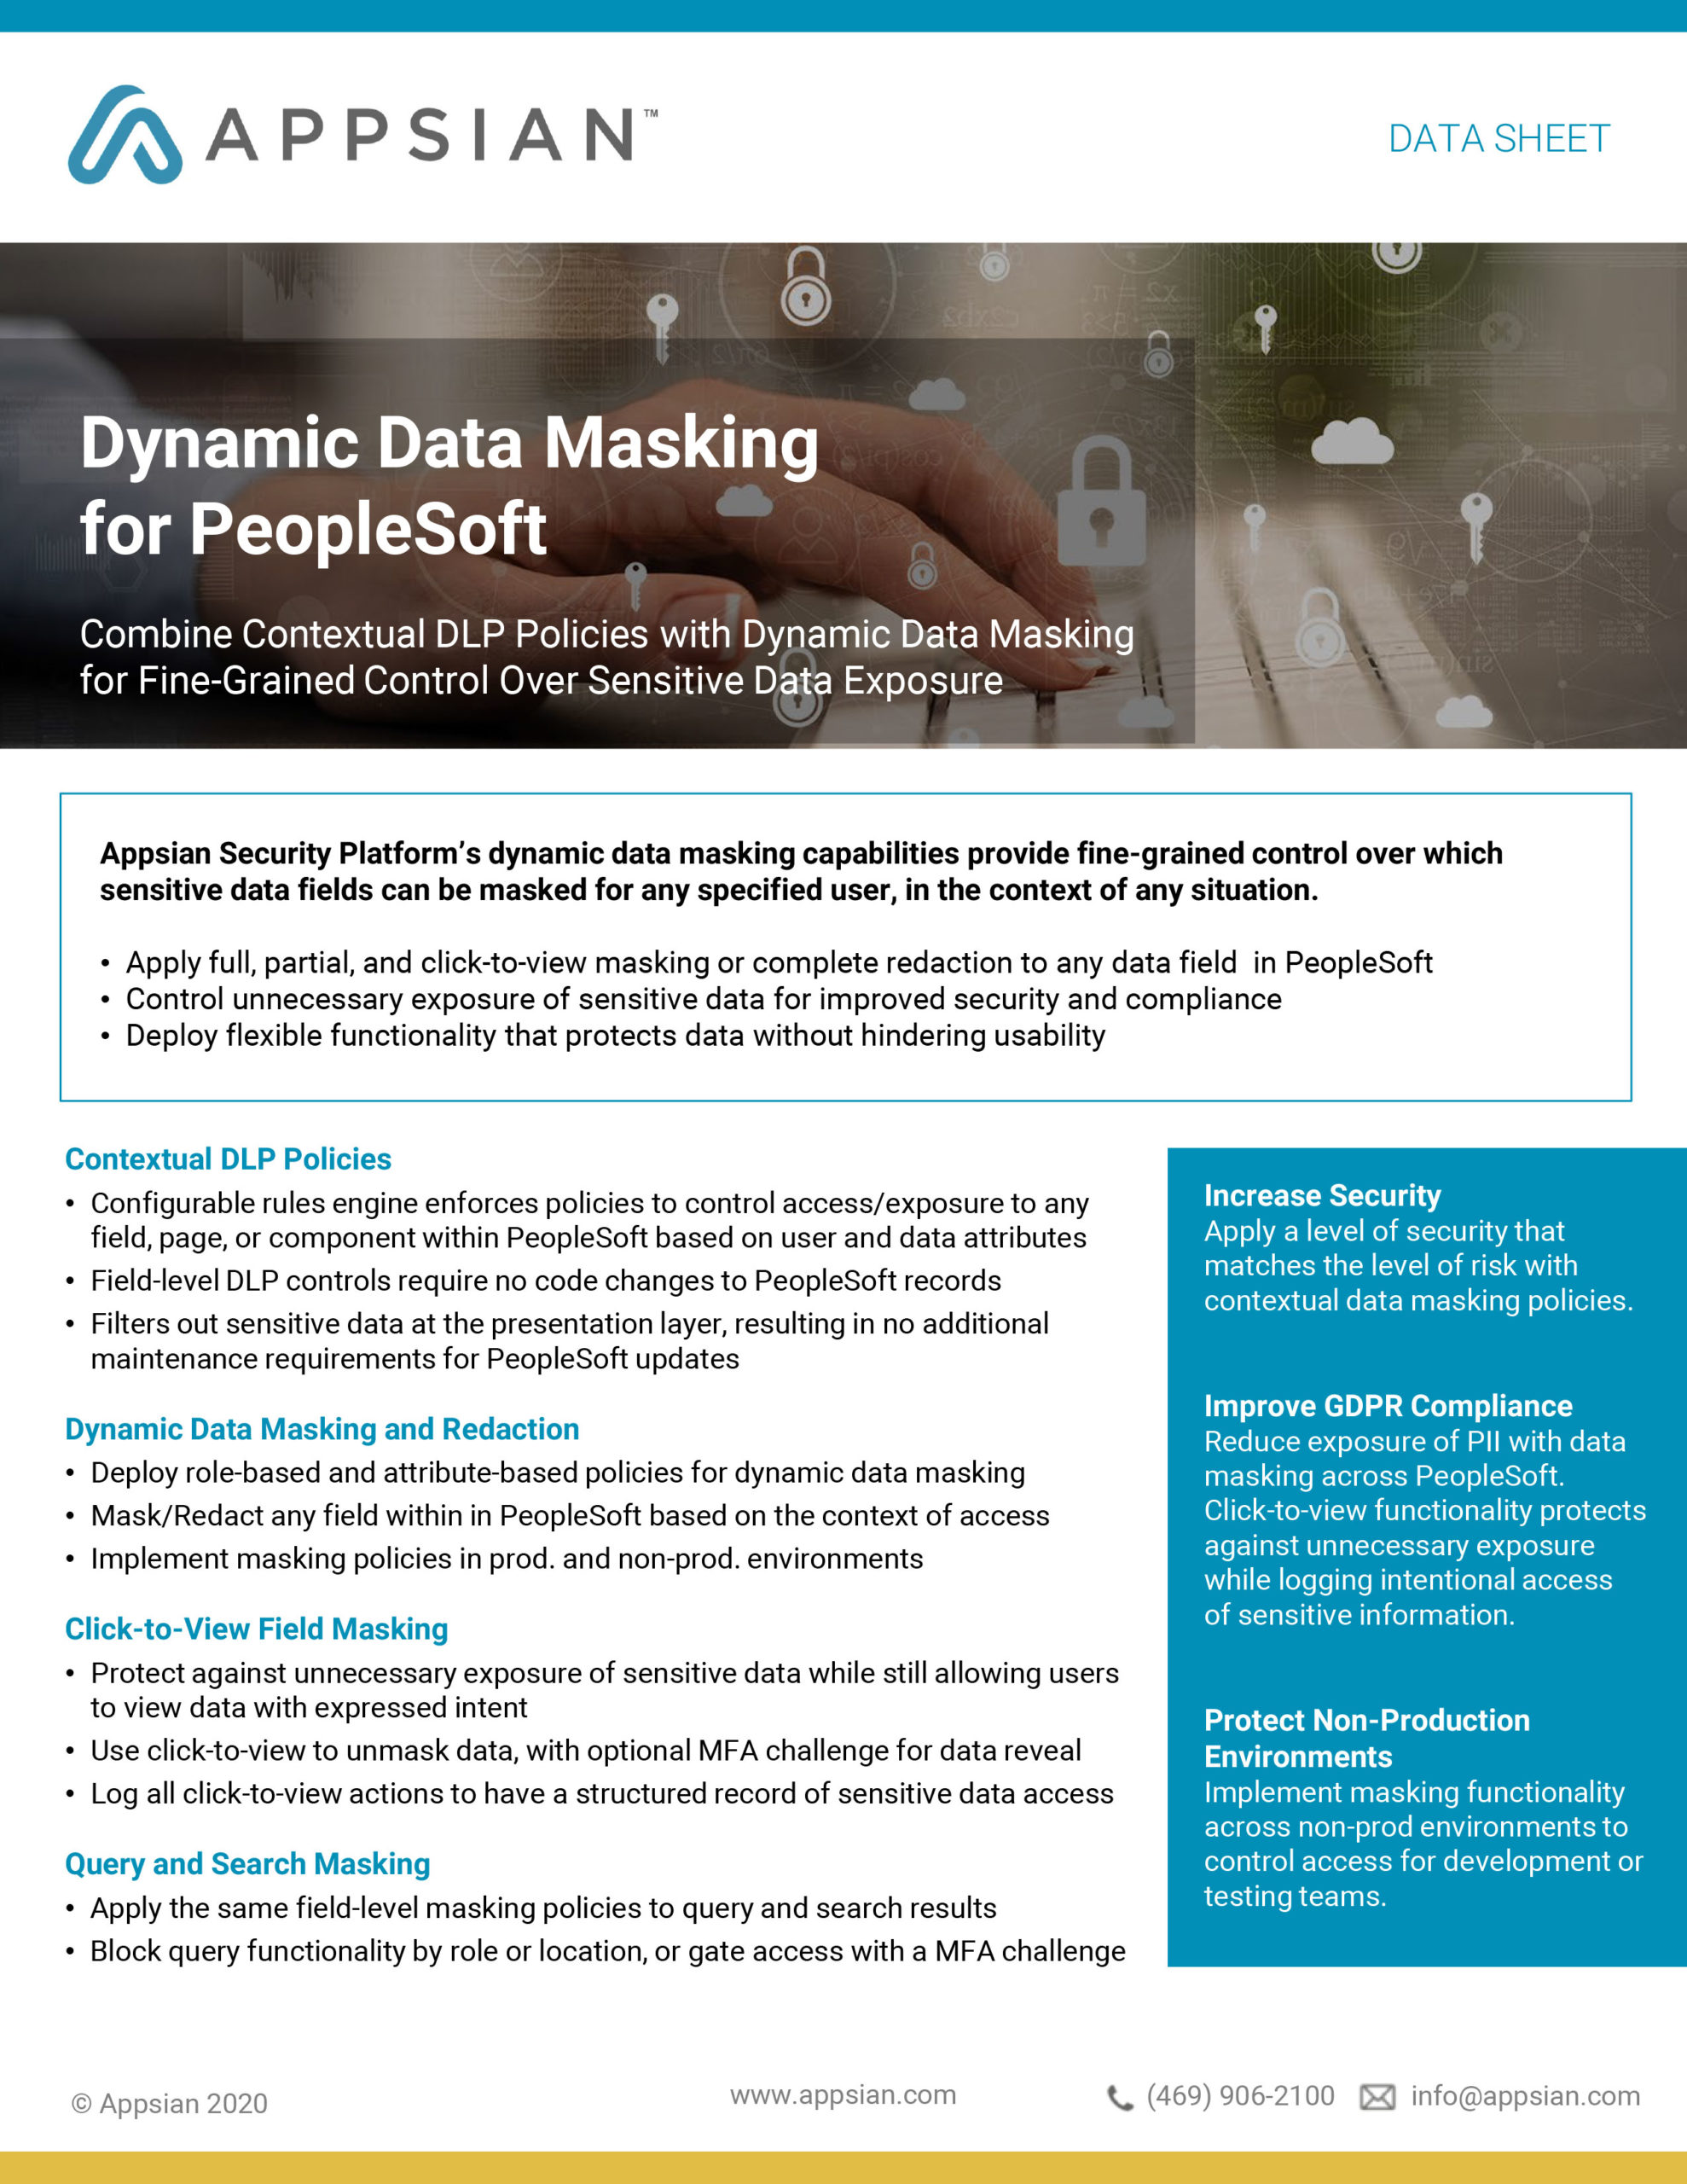 Dynamic Data Masking for PeopleSoft